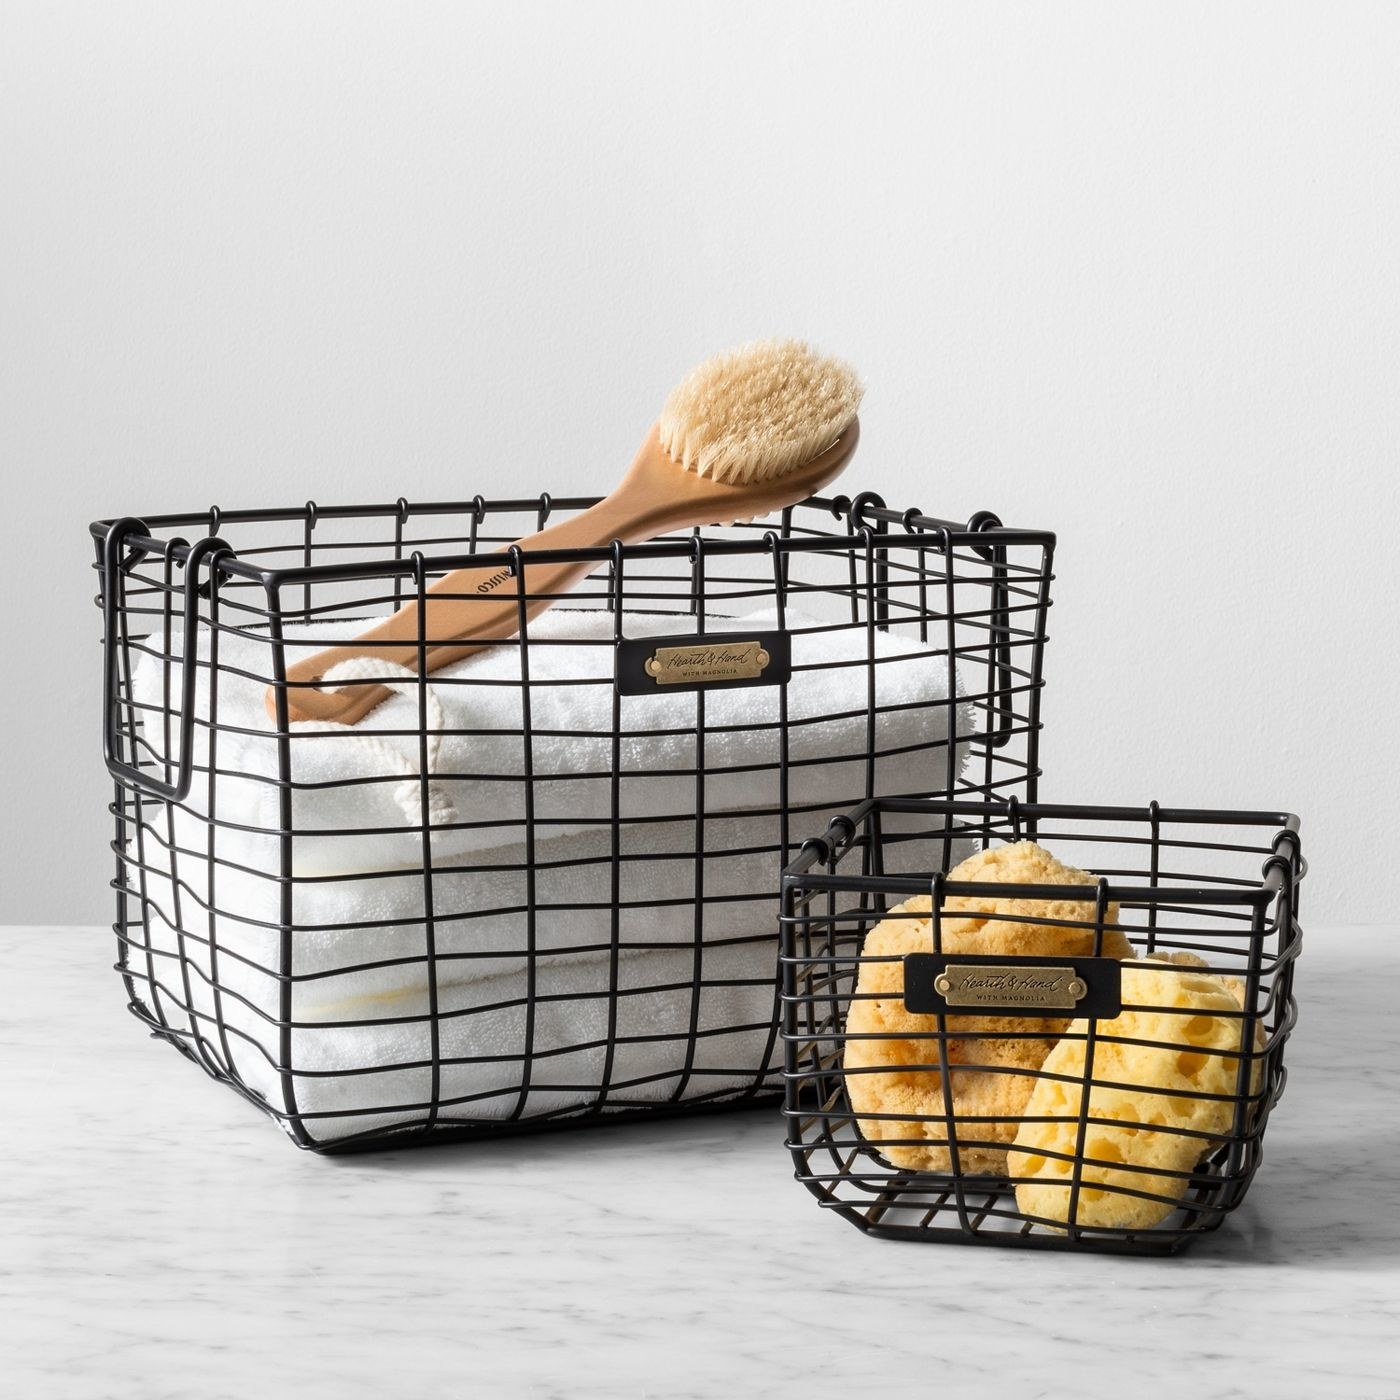 Two wire storage baskets in small and large size filled with bathing items